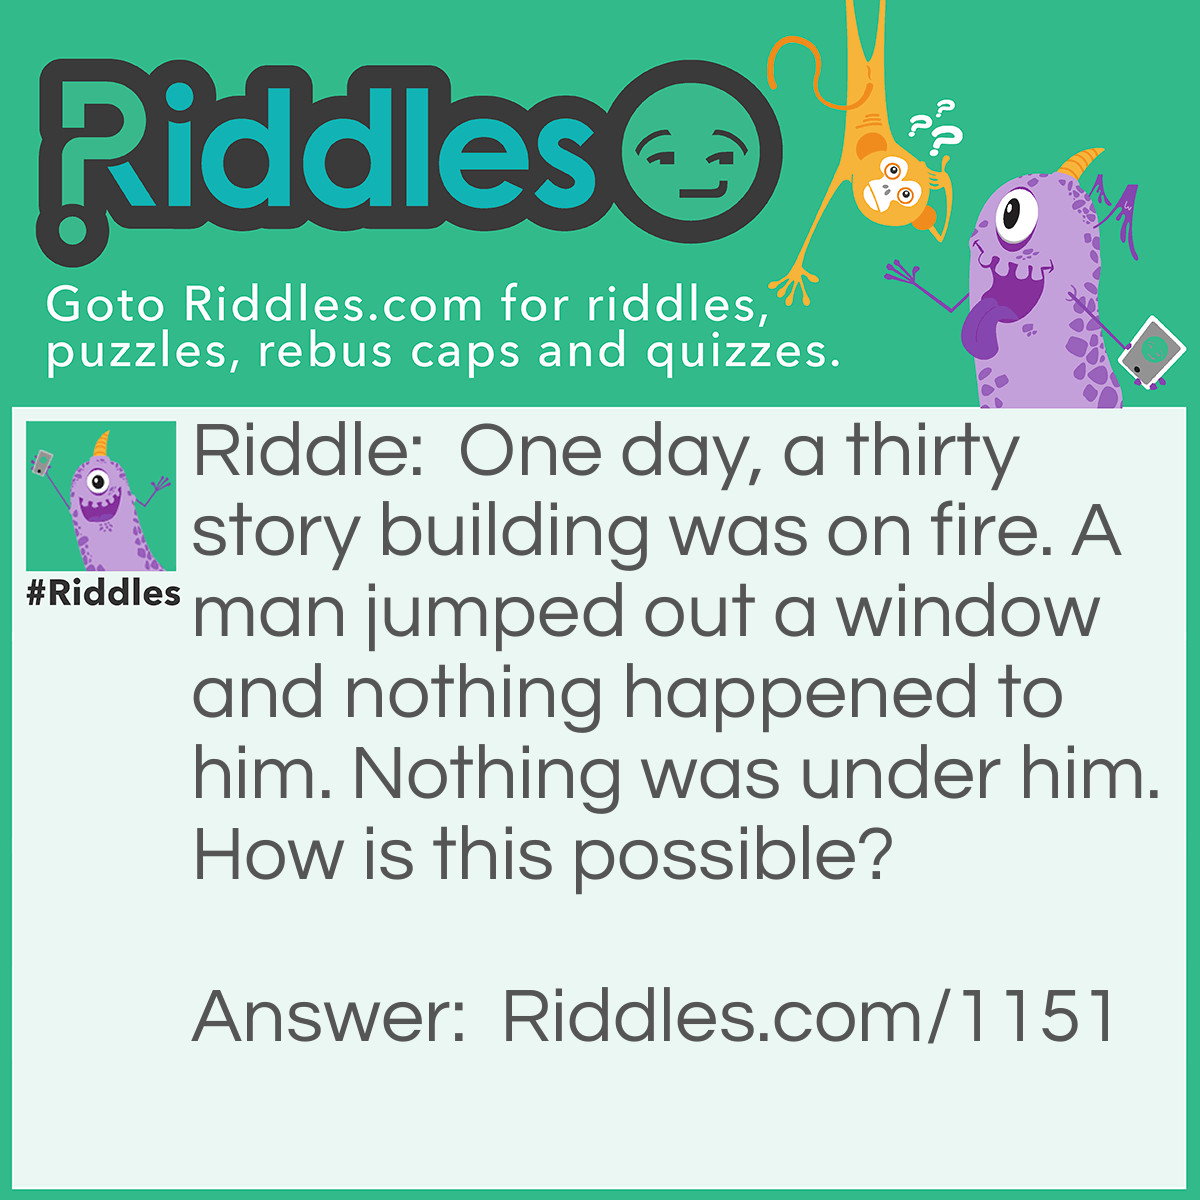 Riddle: One day, a thirty-story building was on fire. A man jumped out a window and nothing happened to him. Nothing was under him. How is this possible? Answer: He was on the first floor.